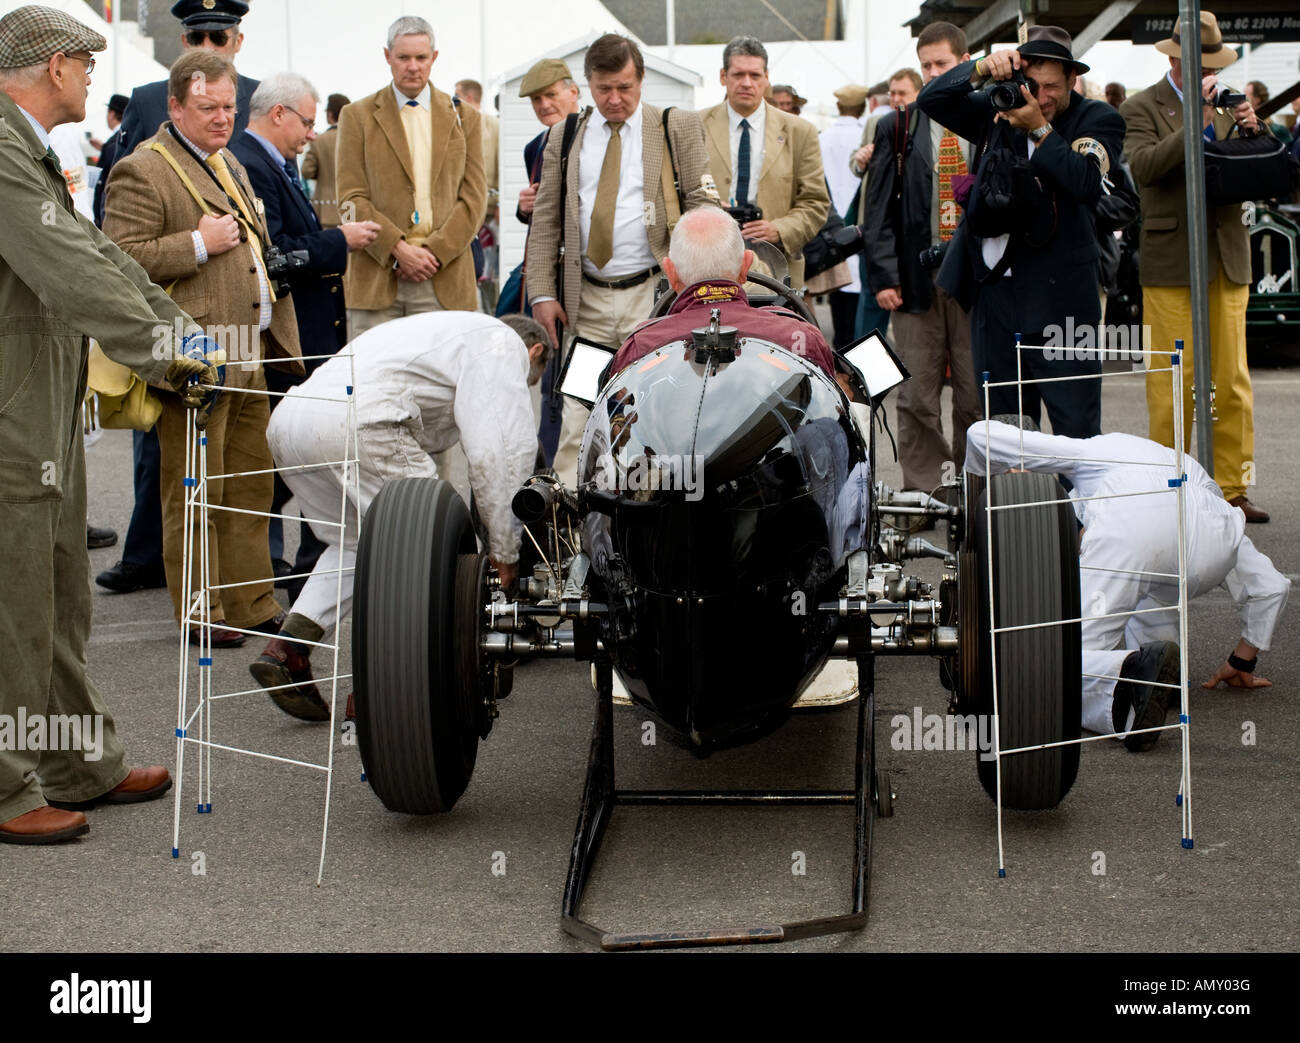 Paddock scene at the Goodwood Revival meeting in Sussex, UK. Stock Photo